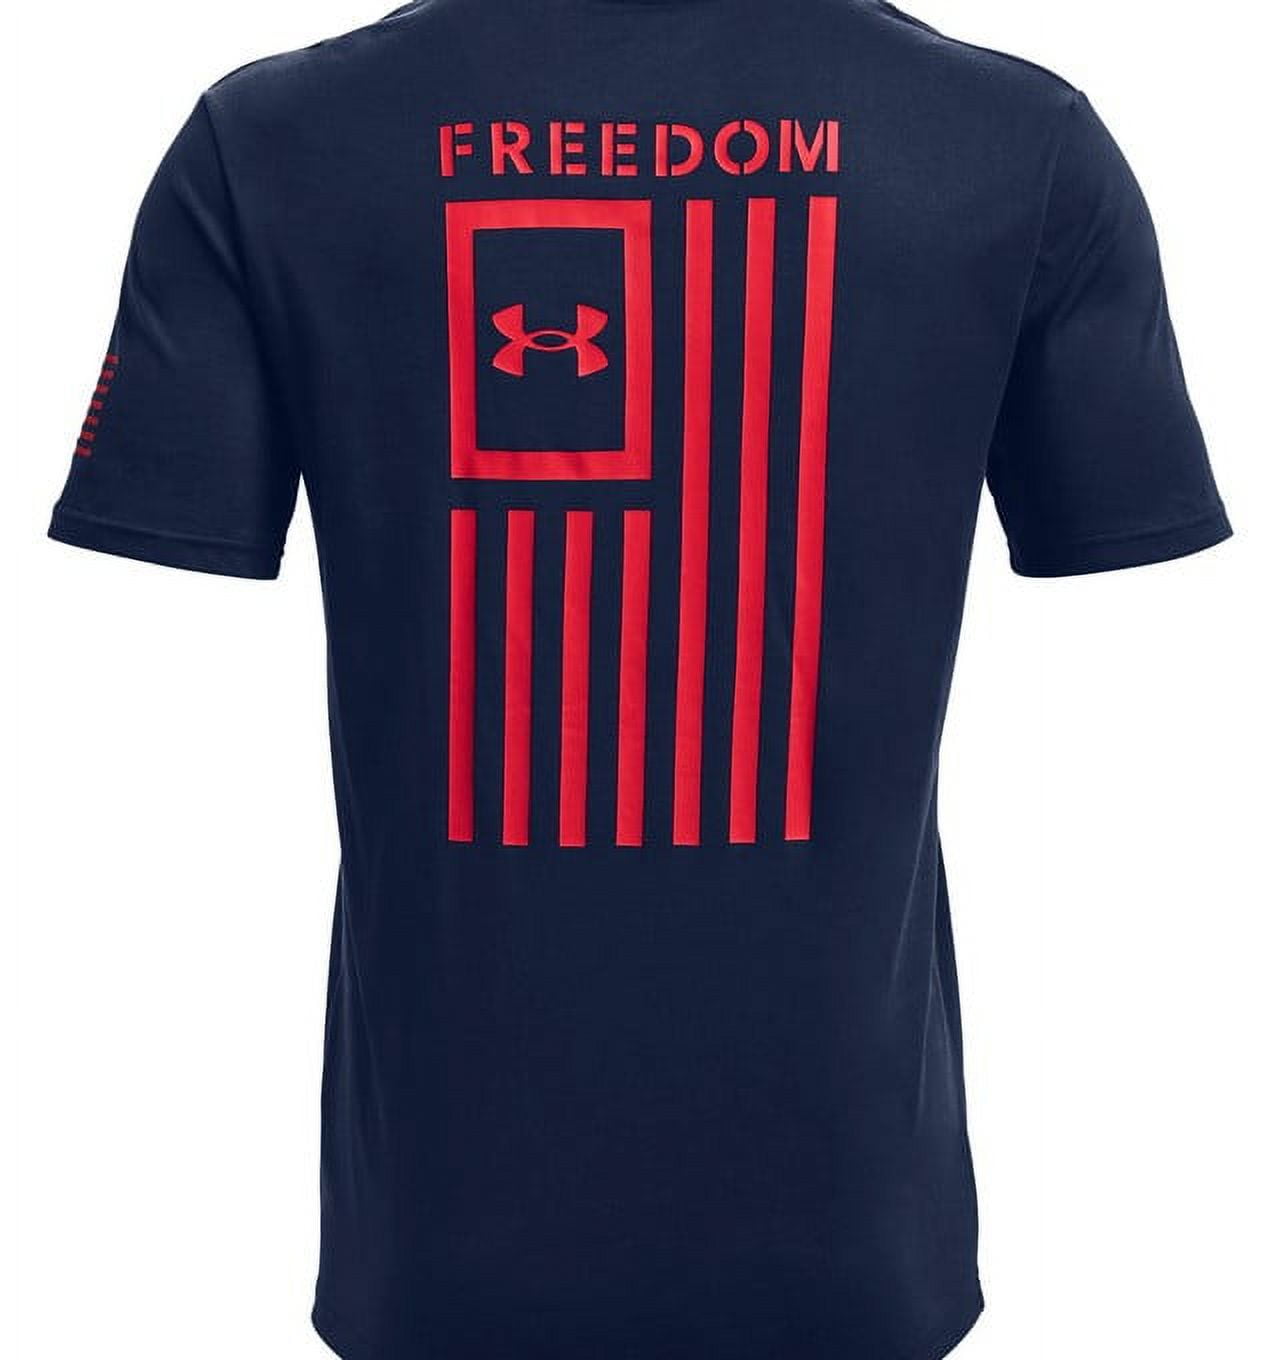 Under Armour 1370810019SM New Freedom Flag Charcoal Size SM Mens T-Shirt 